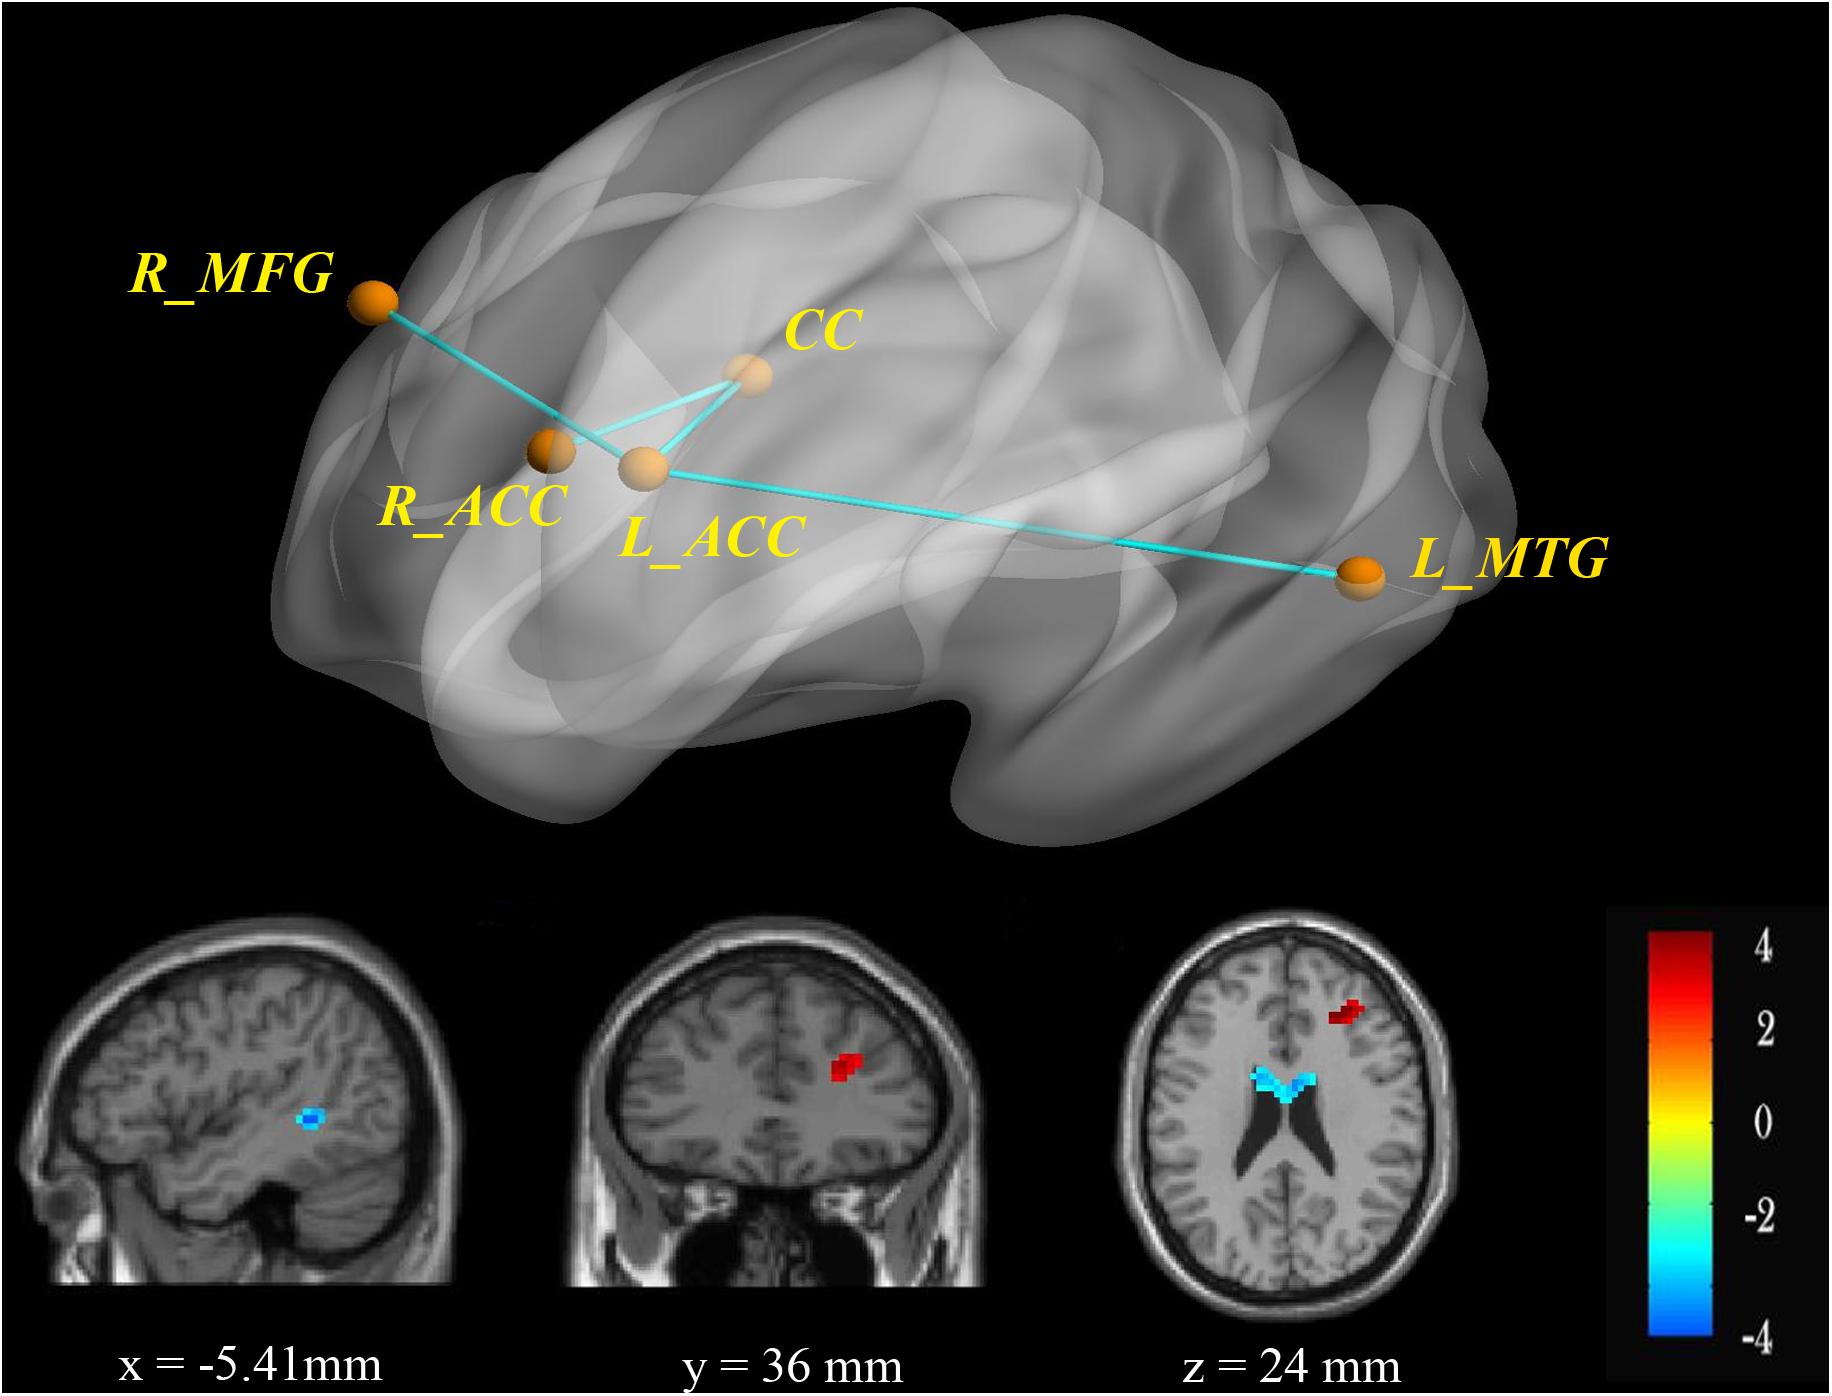 Frontiers Structural And Functional Connectivity Of The Anterior Cingulate Cortex In Patients With Borderline Personality Disorder Neuroscience